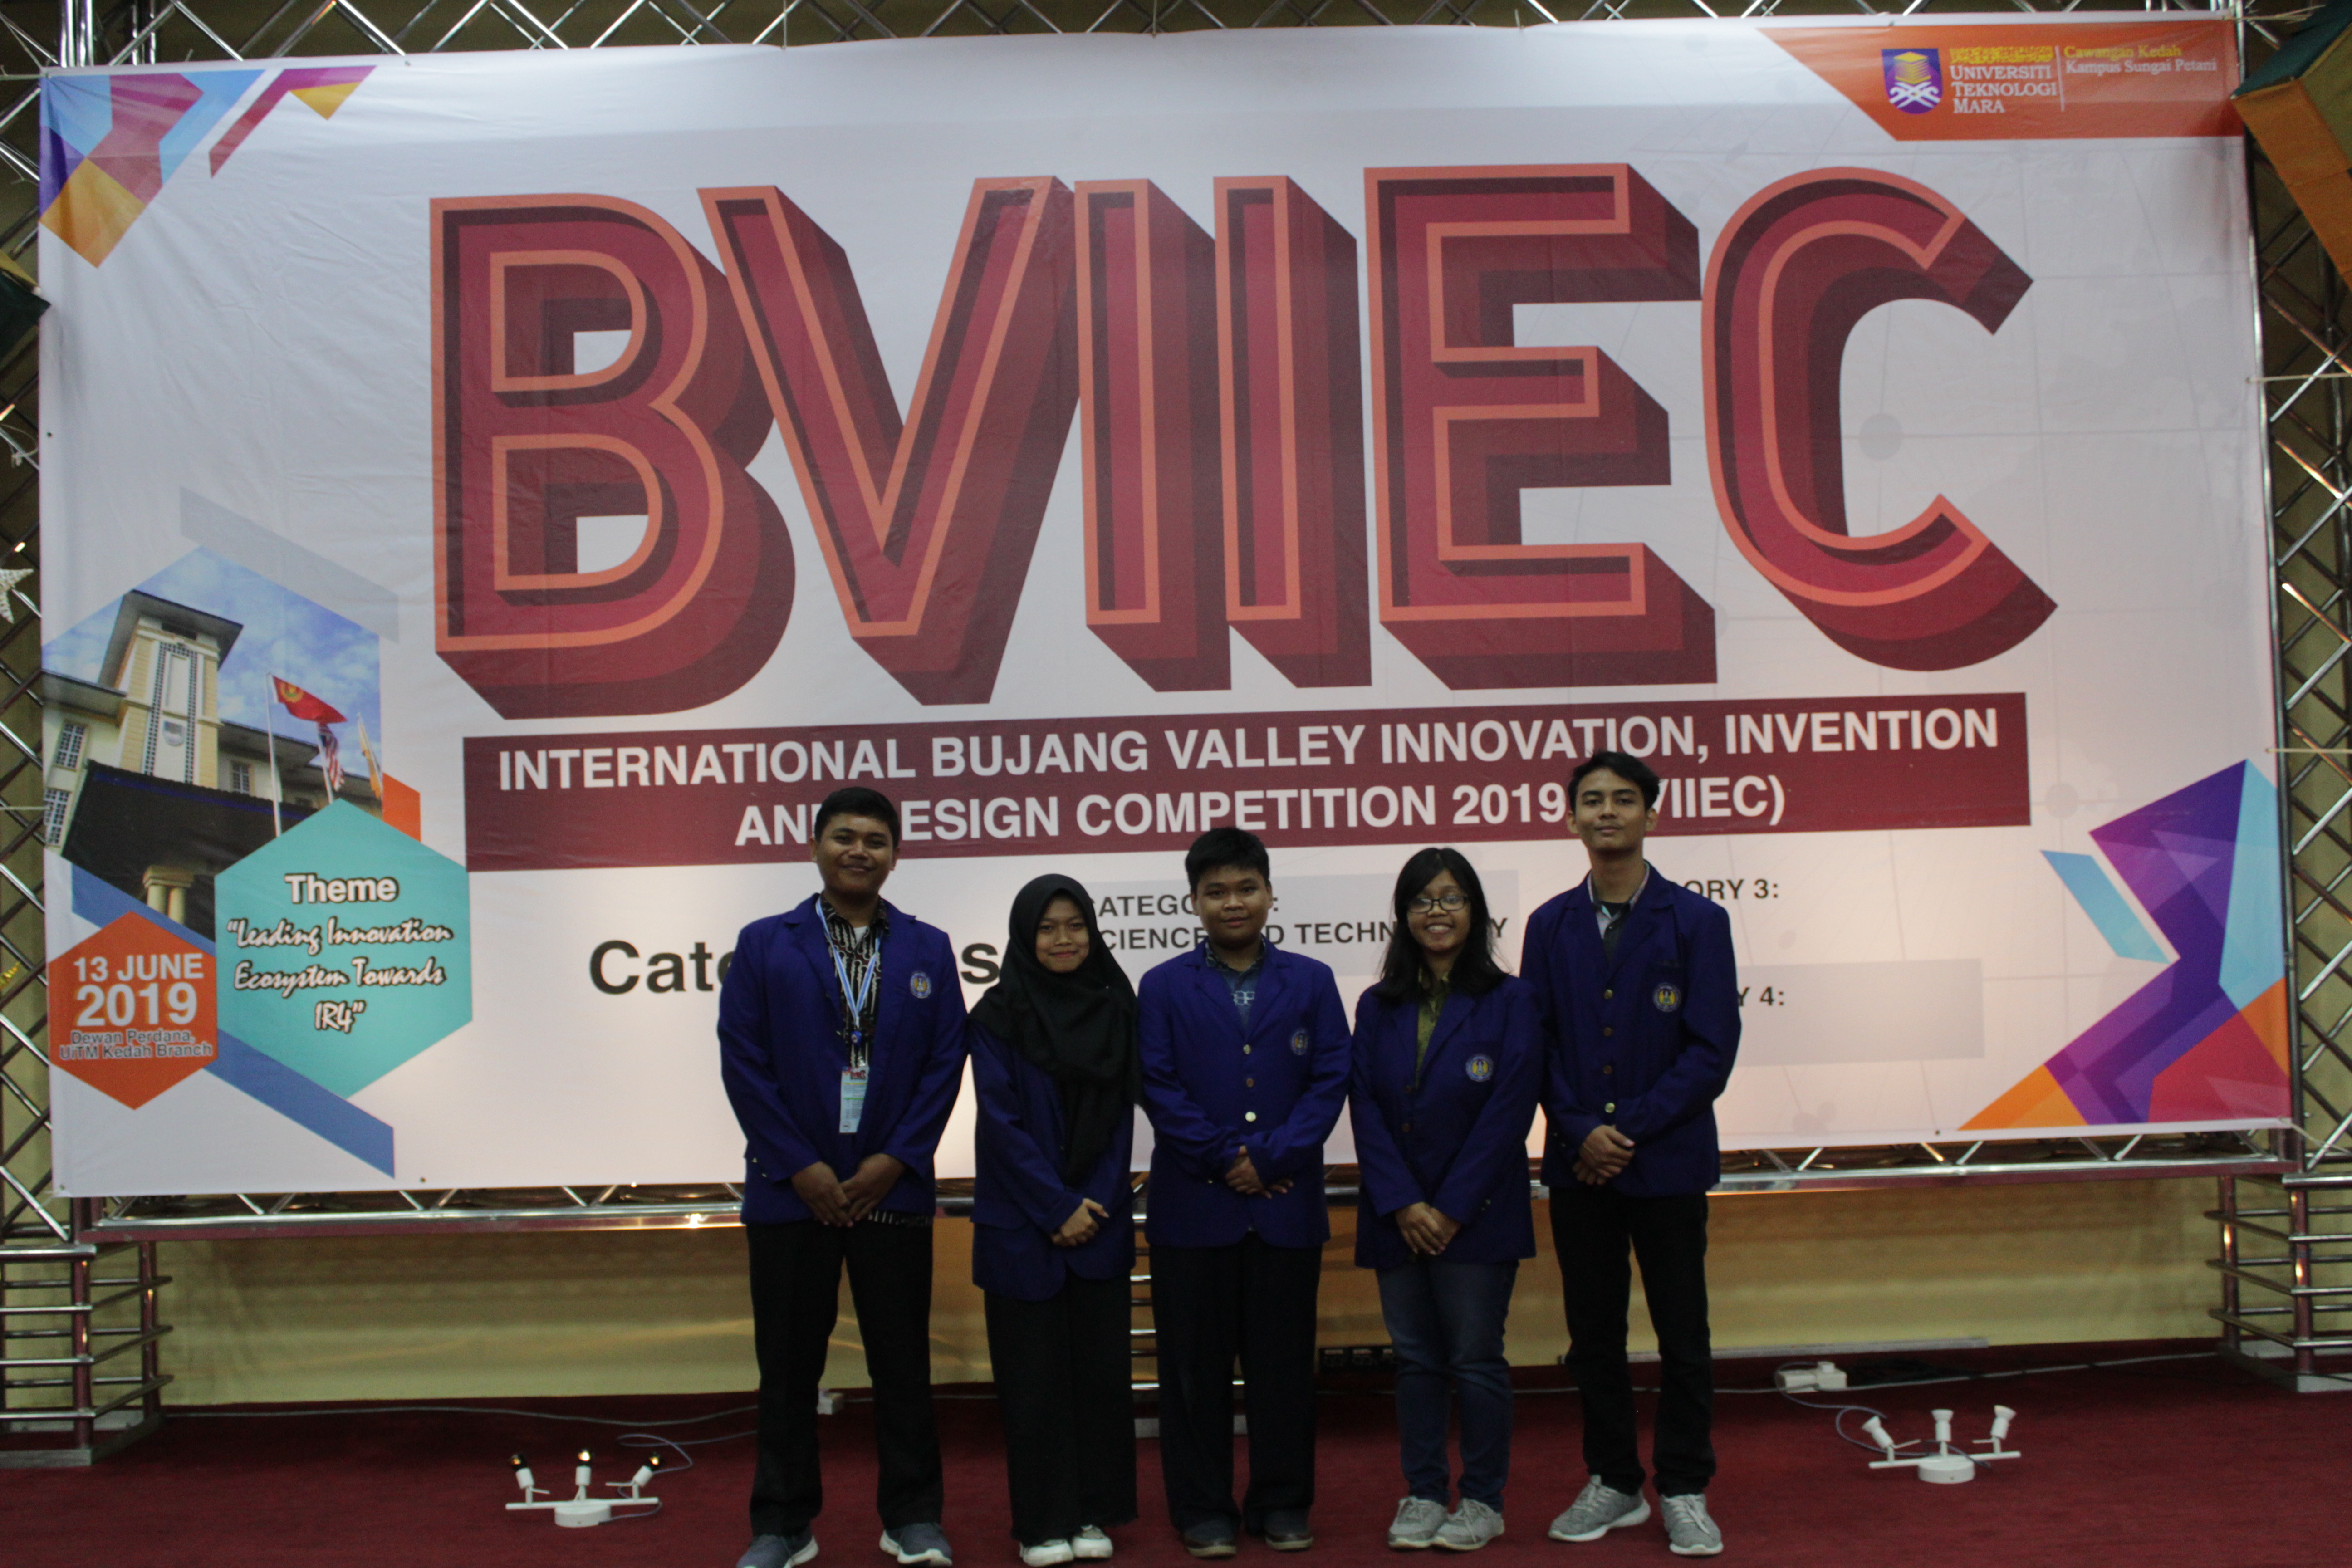 Foto INTERNATIONAL BUJANG VALLEY, INNOVATION, INVENTION, AND DESIGN COMPETITION 2019